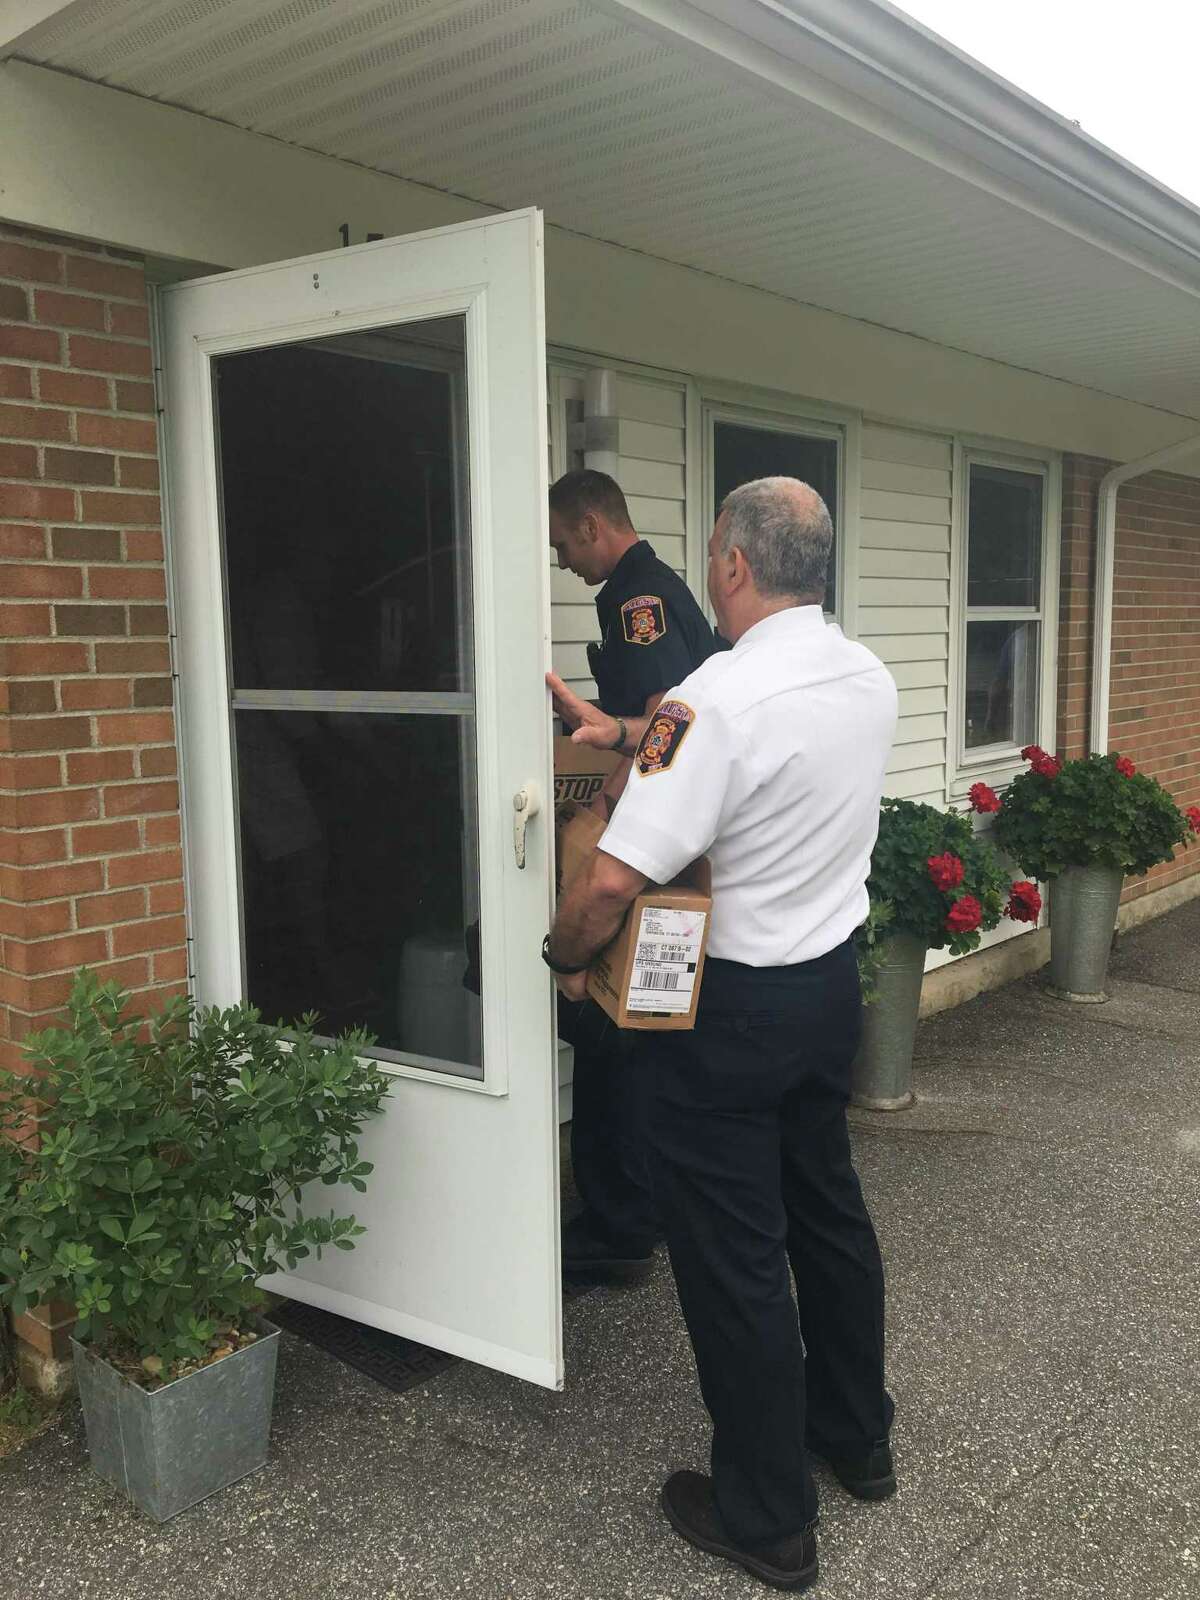 On August 7, the Torrington Fire Marshal’s Office, members of the Torrington Fire Department, and the Torrington Housing Authority installed stove top extinguishers in each unit (56) including the Community Room at Laurel Acres.